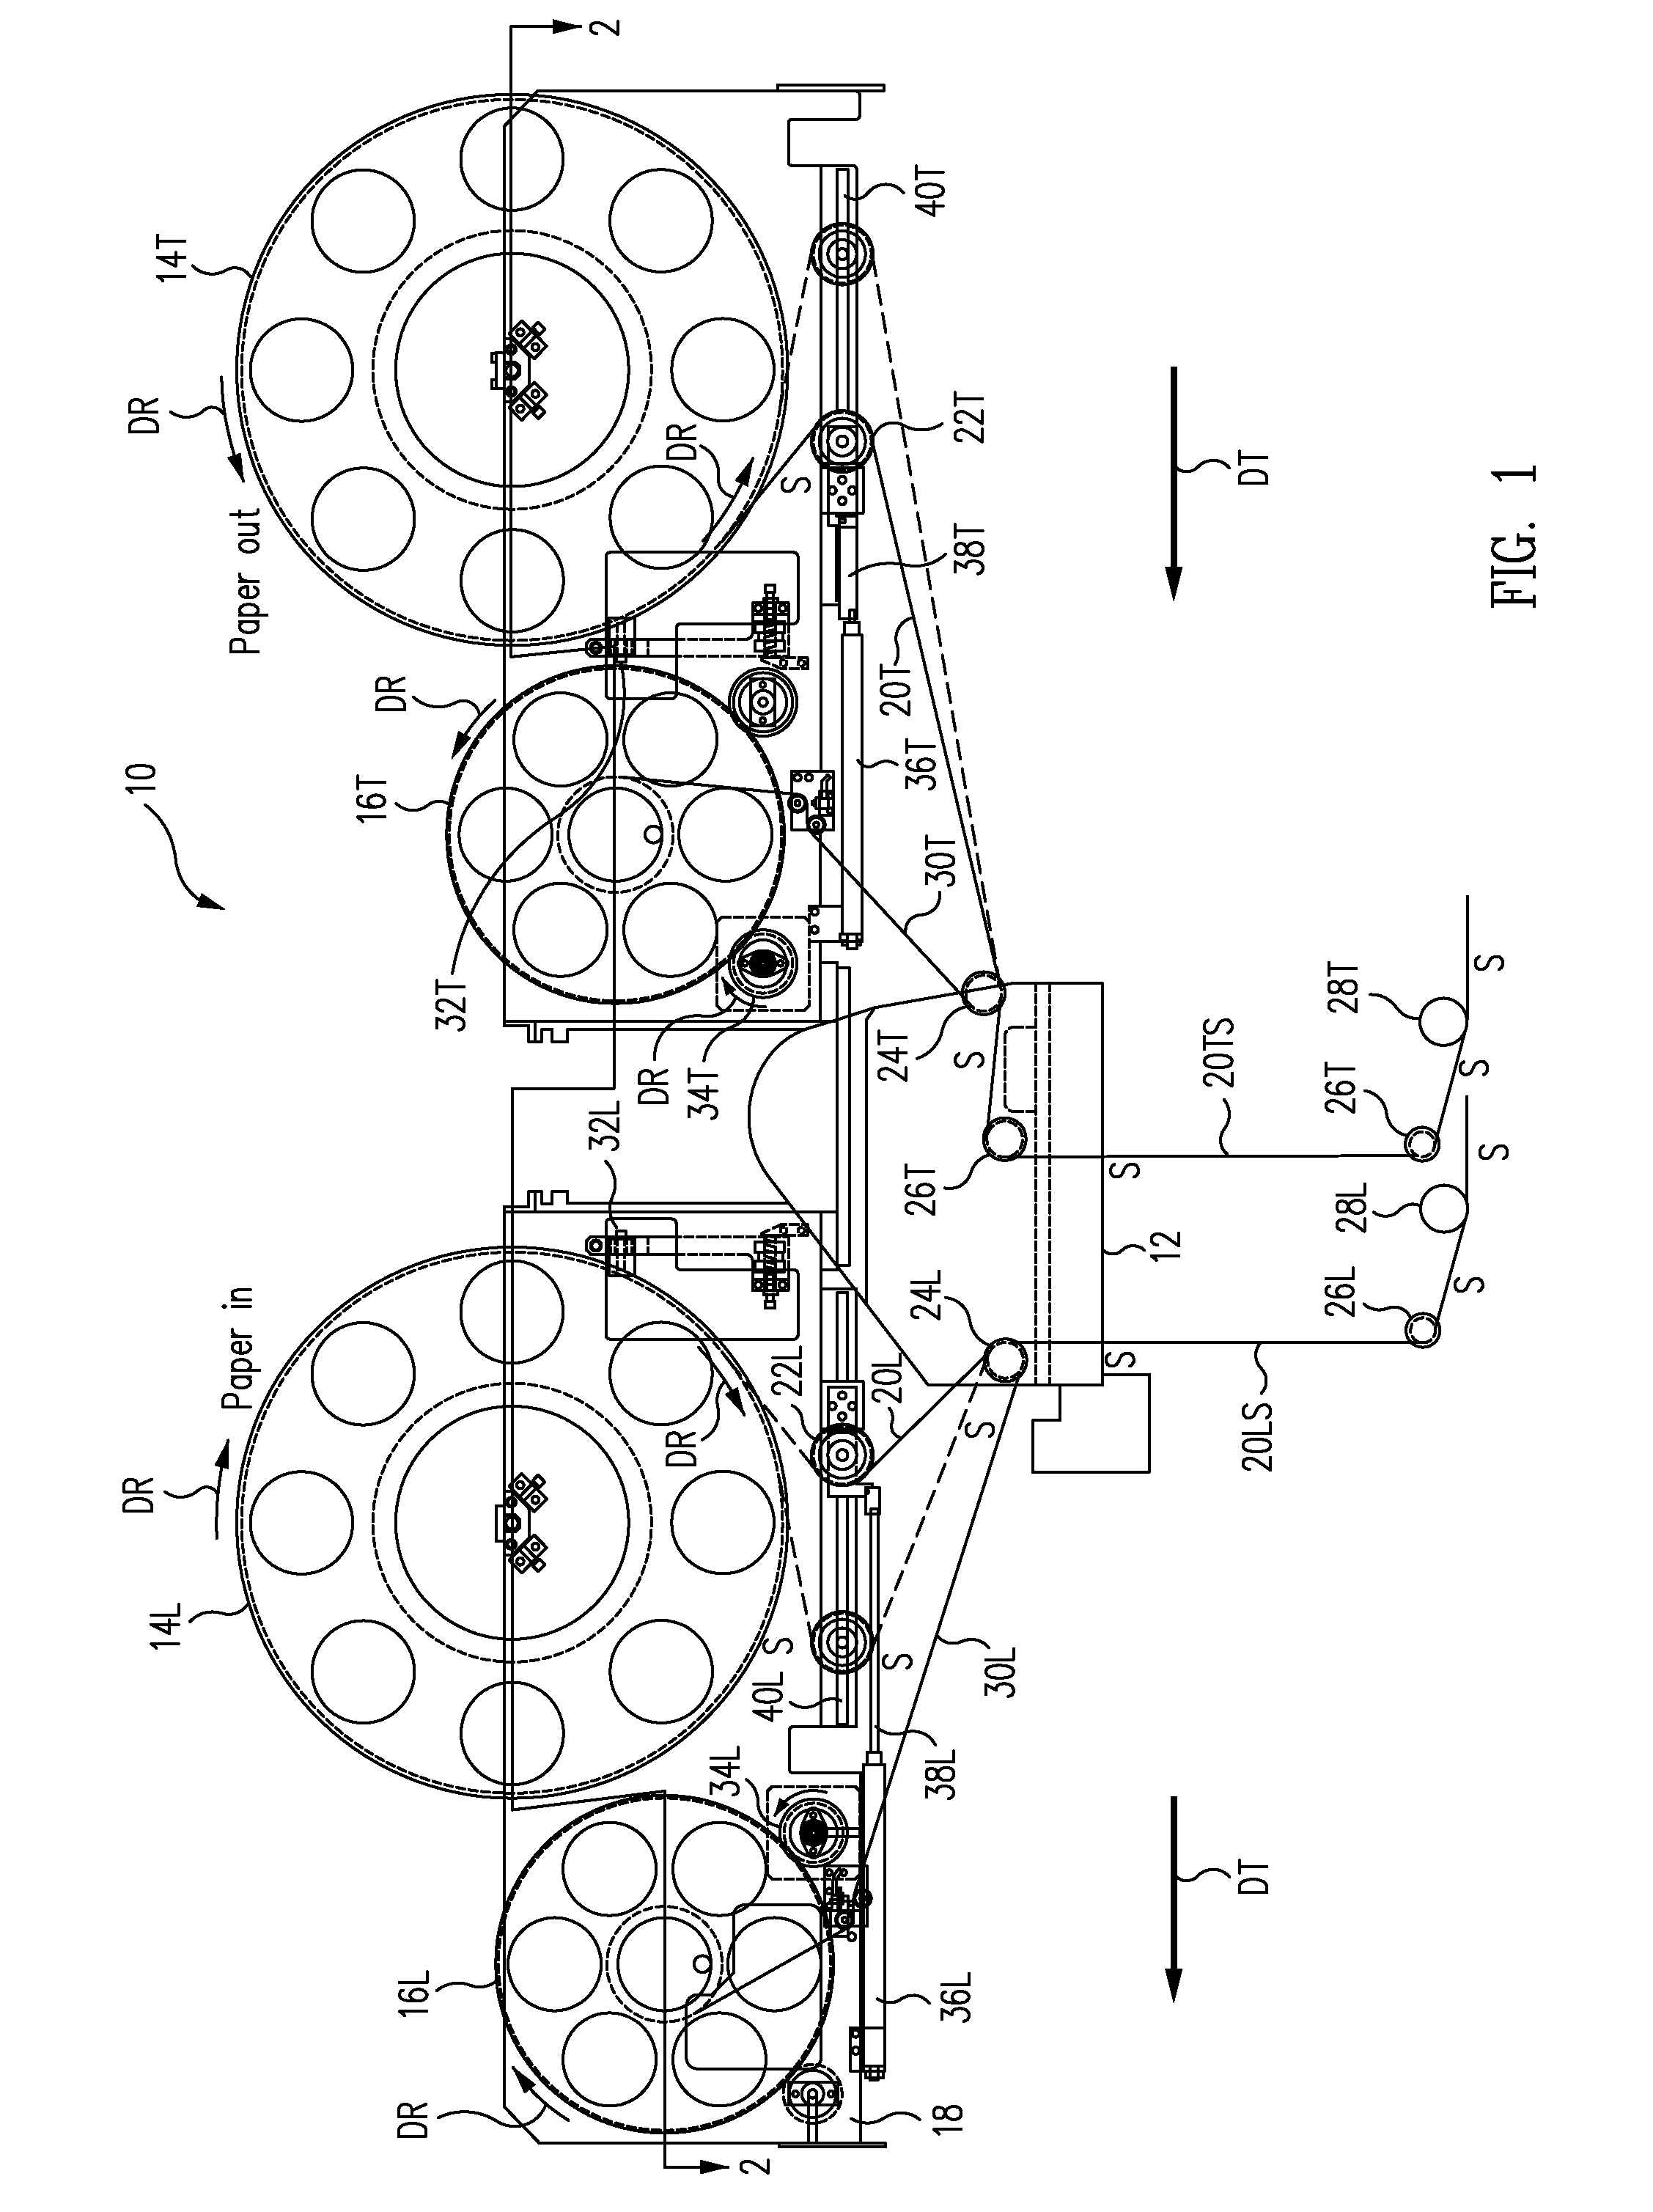 Graphite Tape Supply and Backing Paper Take-Up Apparatus